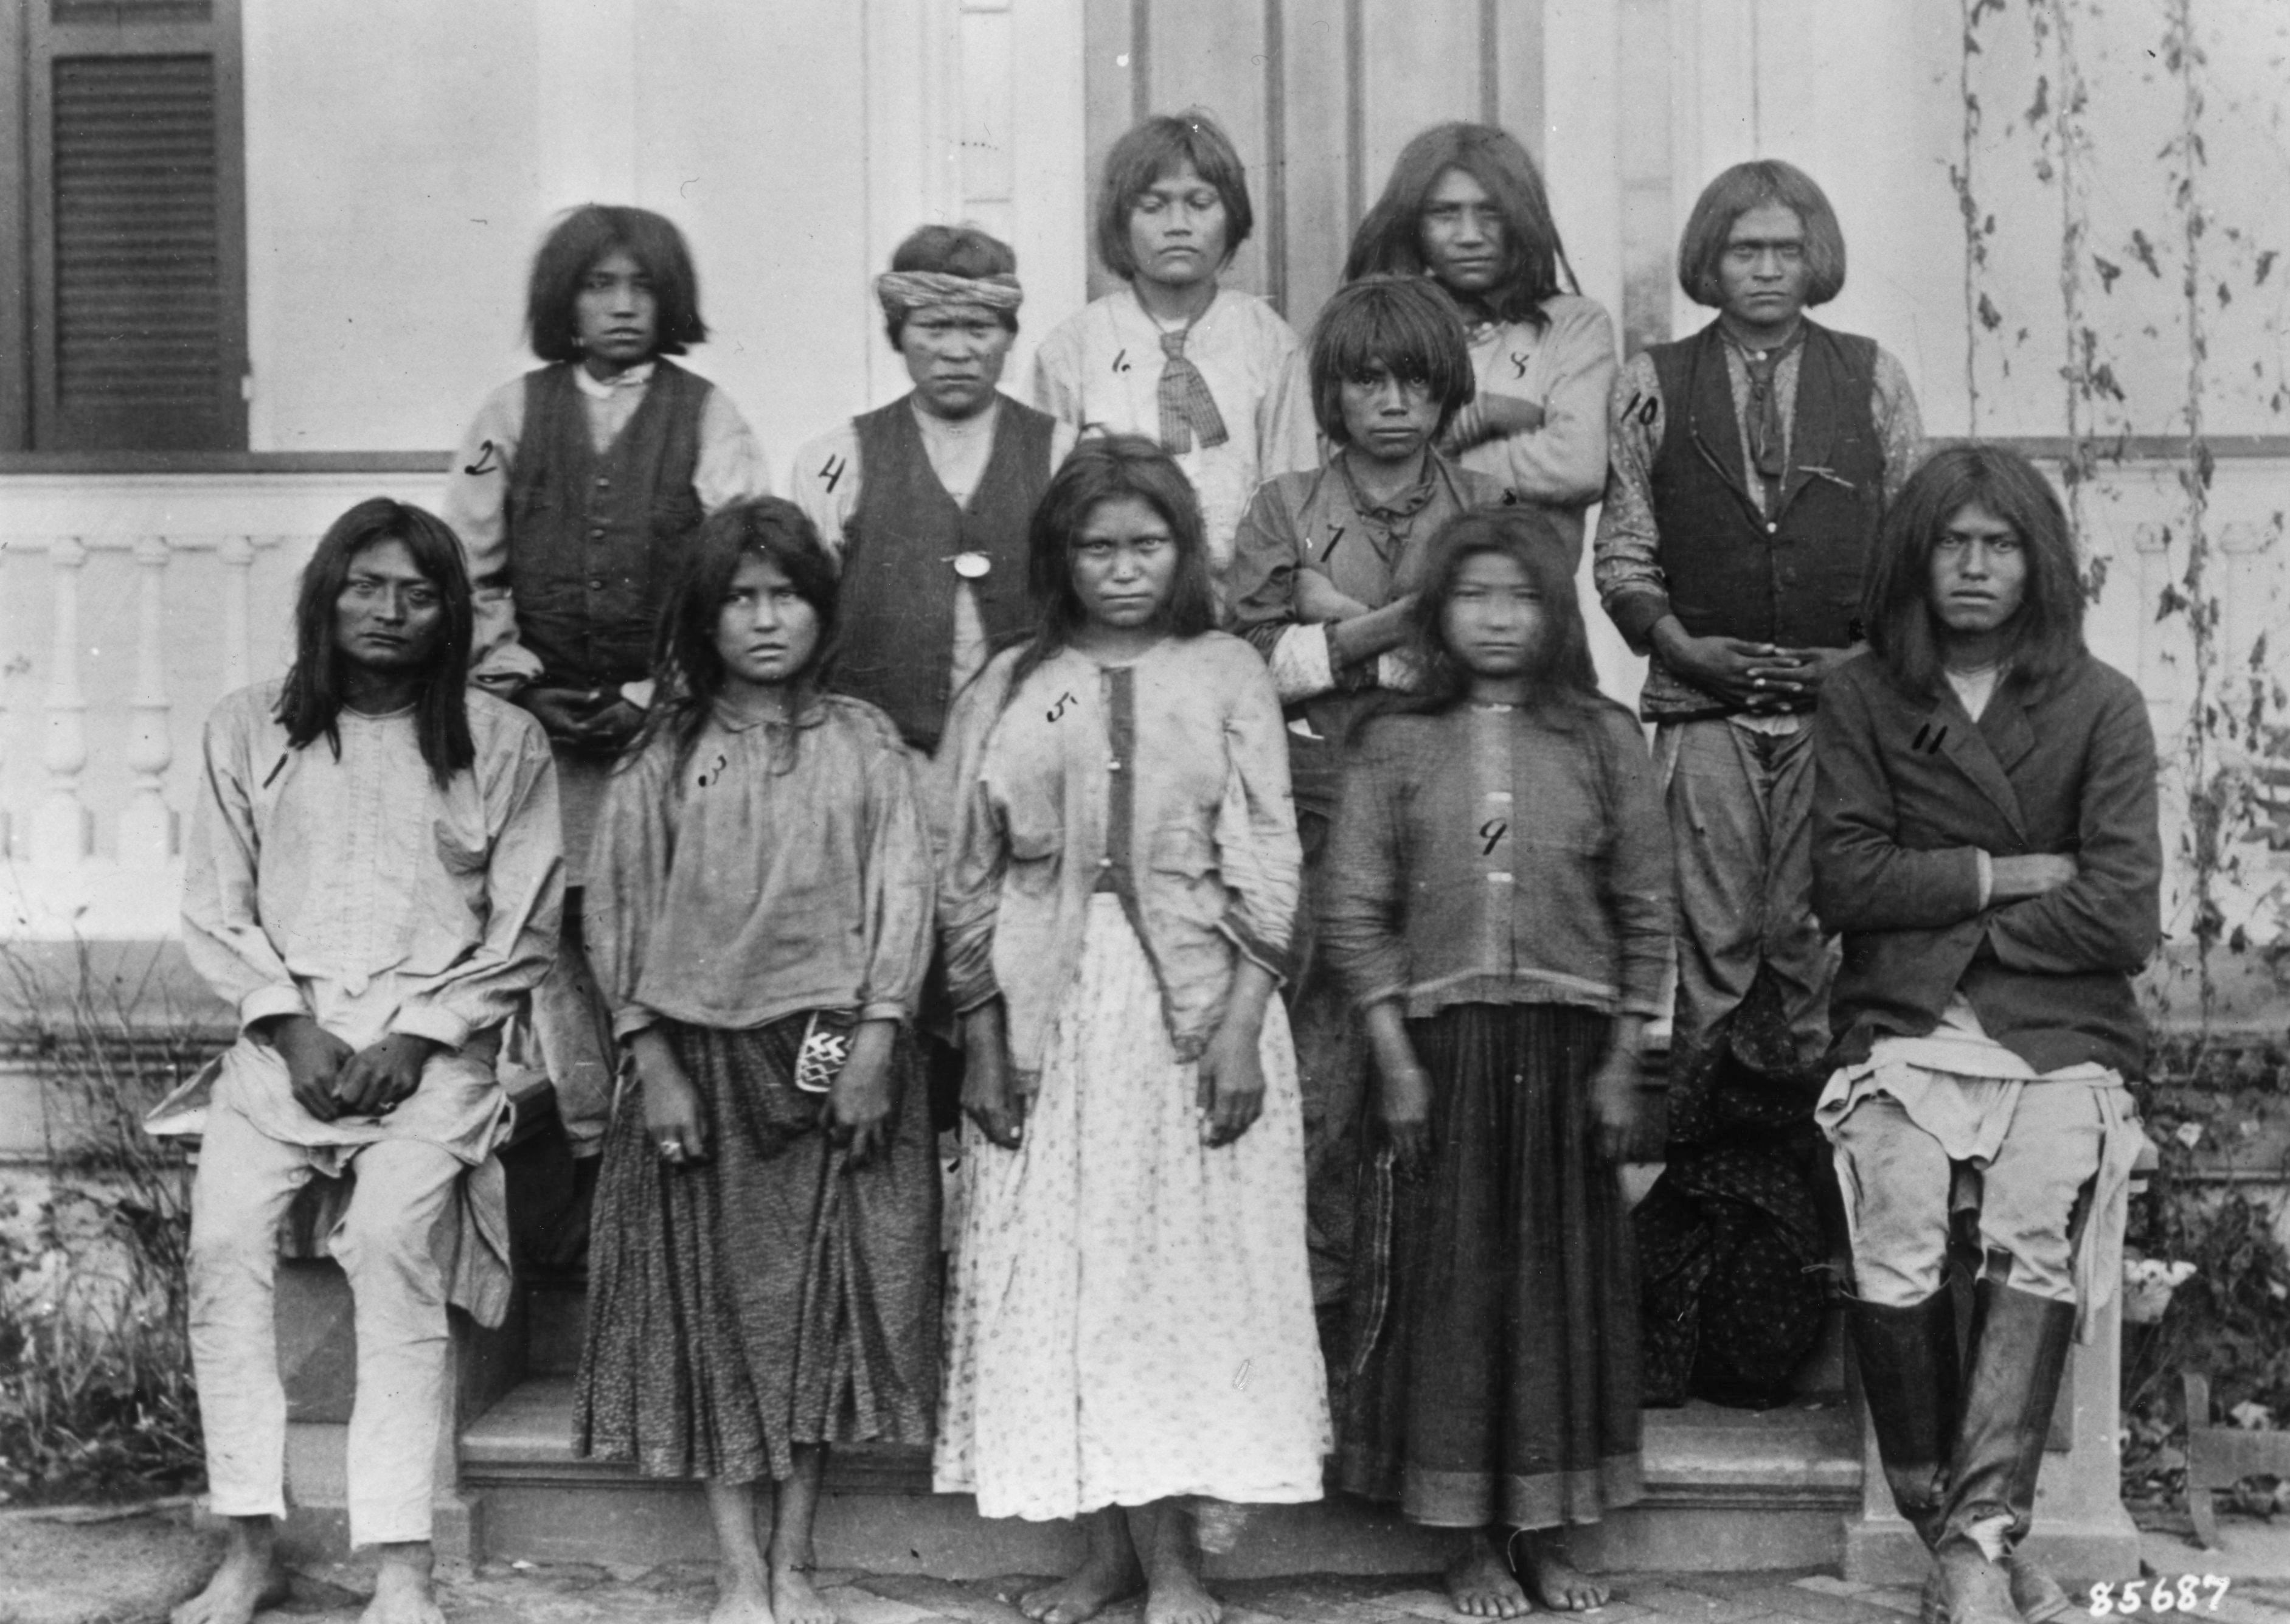 Chiricahua Apache children photographed in front of a building.